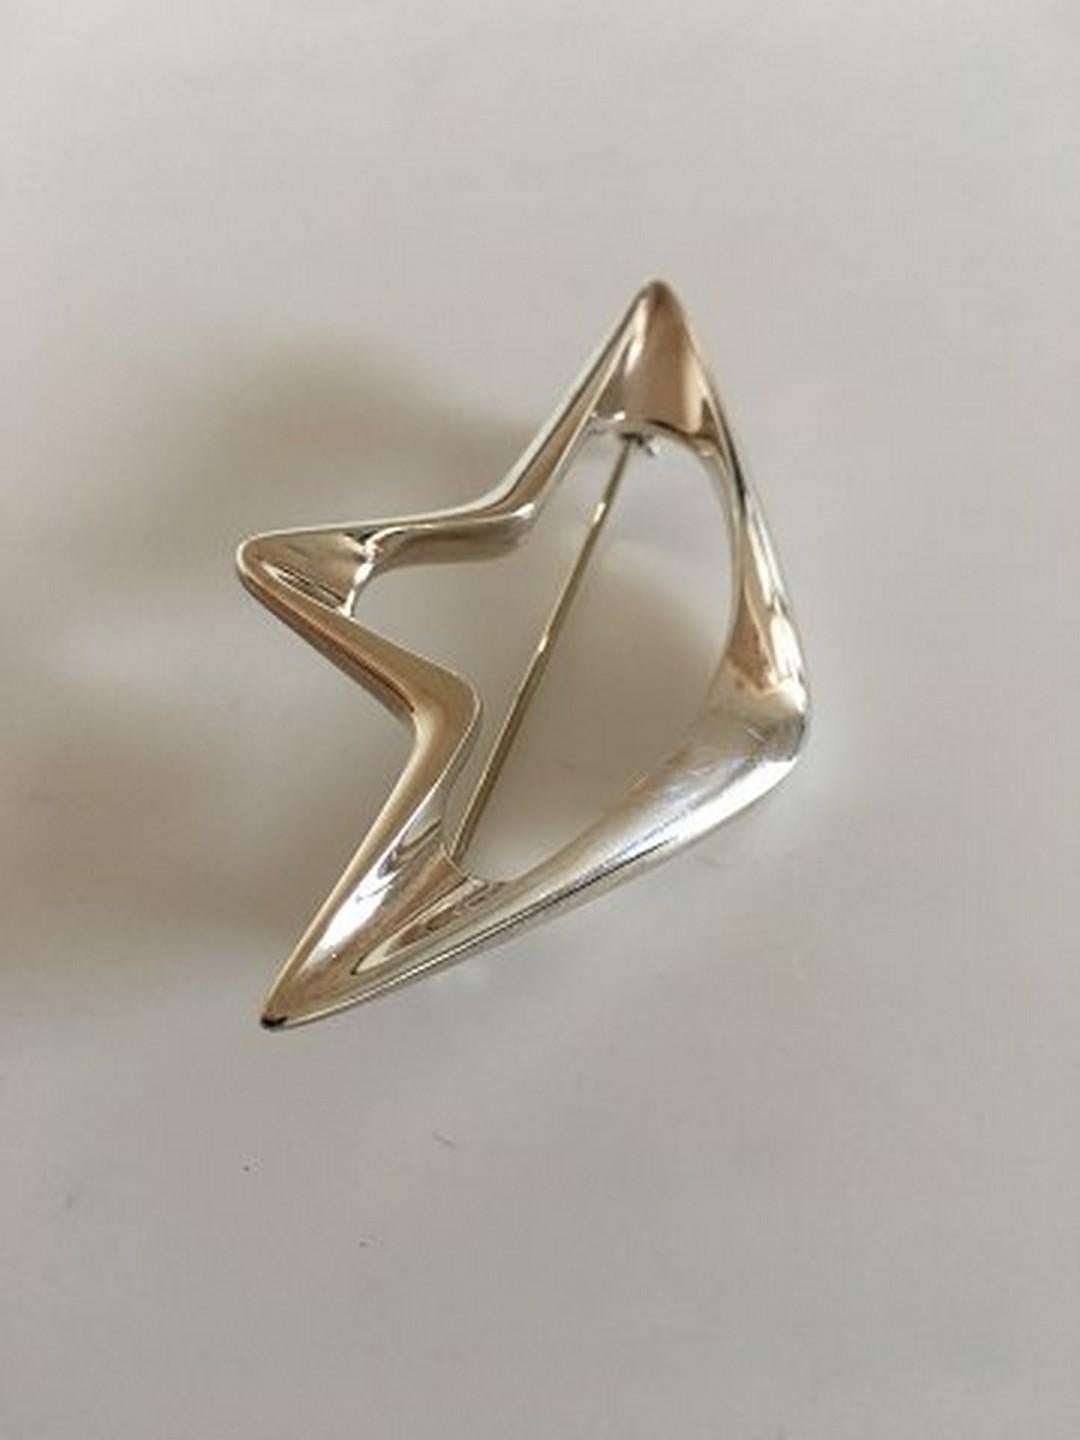 Georg Jensen Sterling Silver Henning Koppel Brooch No 376. From after 1945. Measures 7.2 cm / 1 37/64 in. x 4 cm / 1 37/64 in. Weighs 21 g / 0.75 oz.